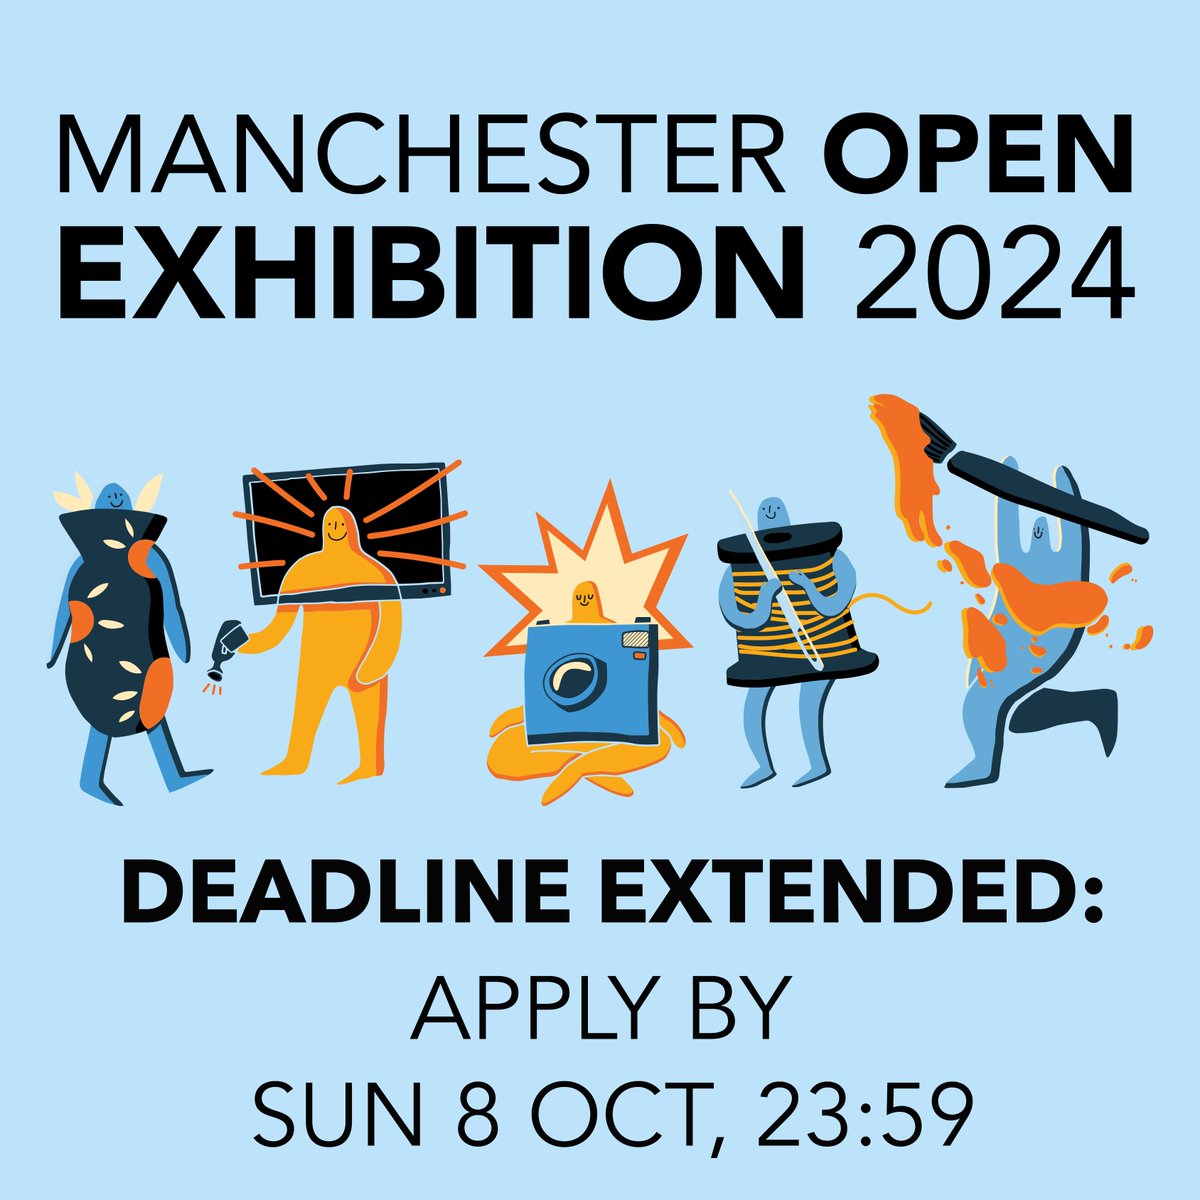 DEADLINE EXTENDED: Please note that the new submission deadline for the Manchester Open 2024 exhibition is now💥Sun 8 Oct, 23:59💥. Apply here: homemcr.org/exhibition/man… #ManchesterOpen2024 #opencall